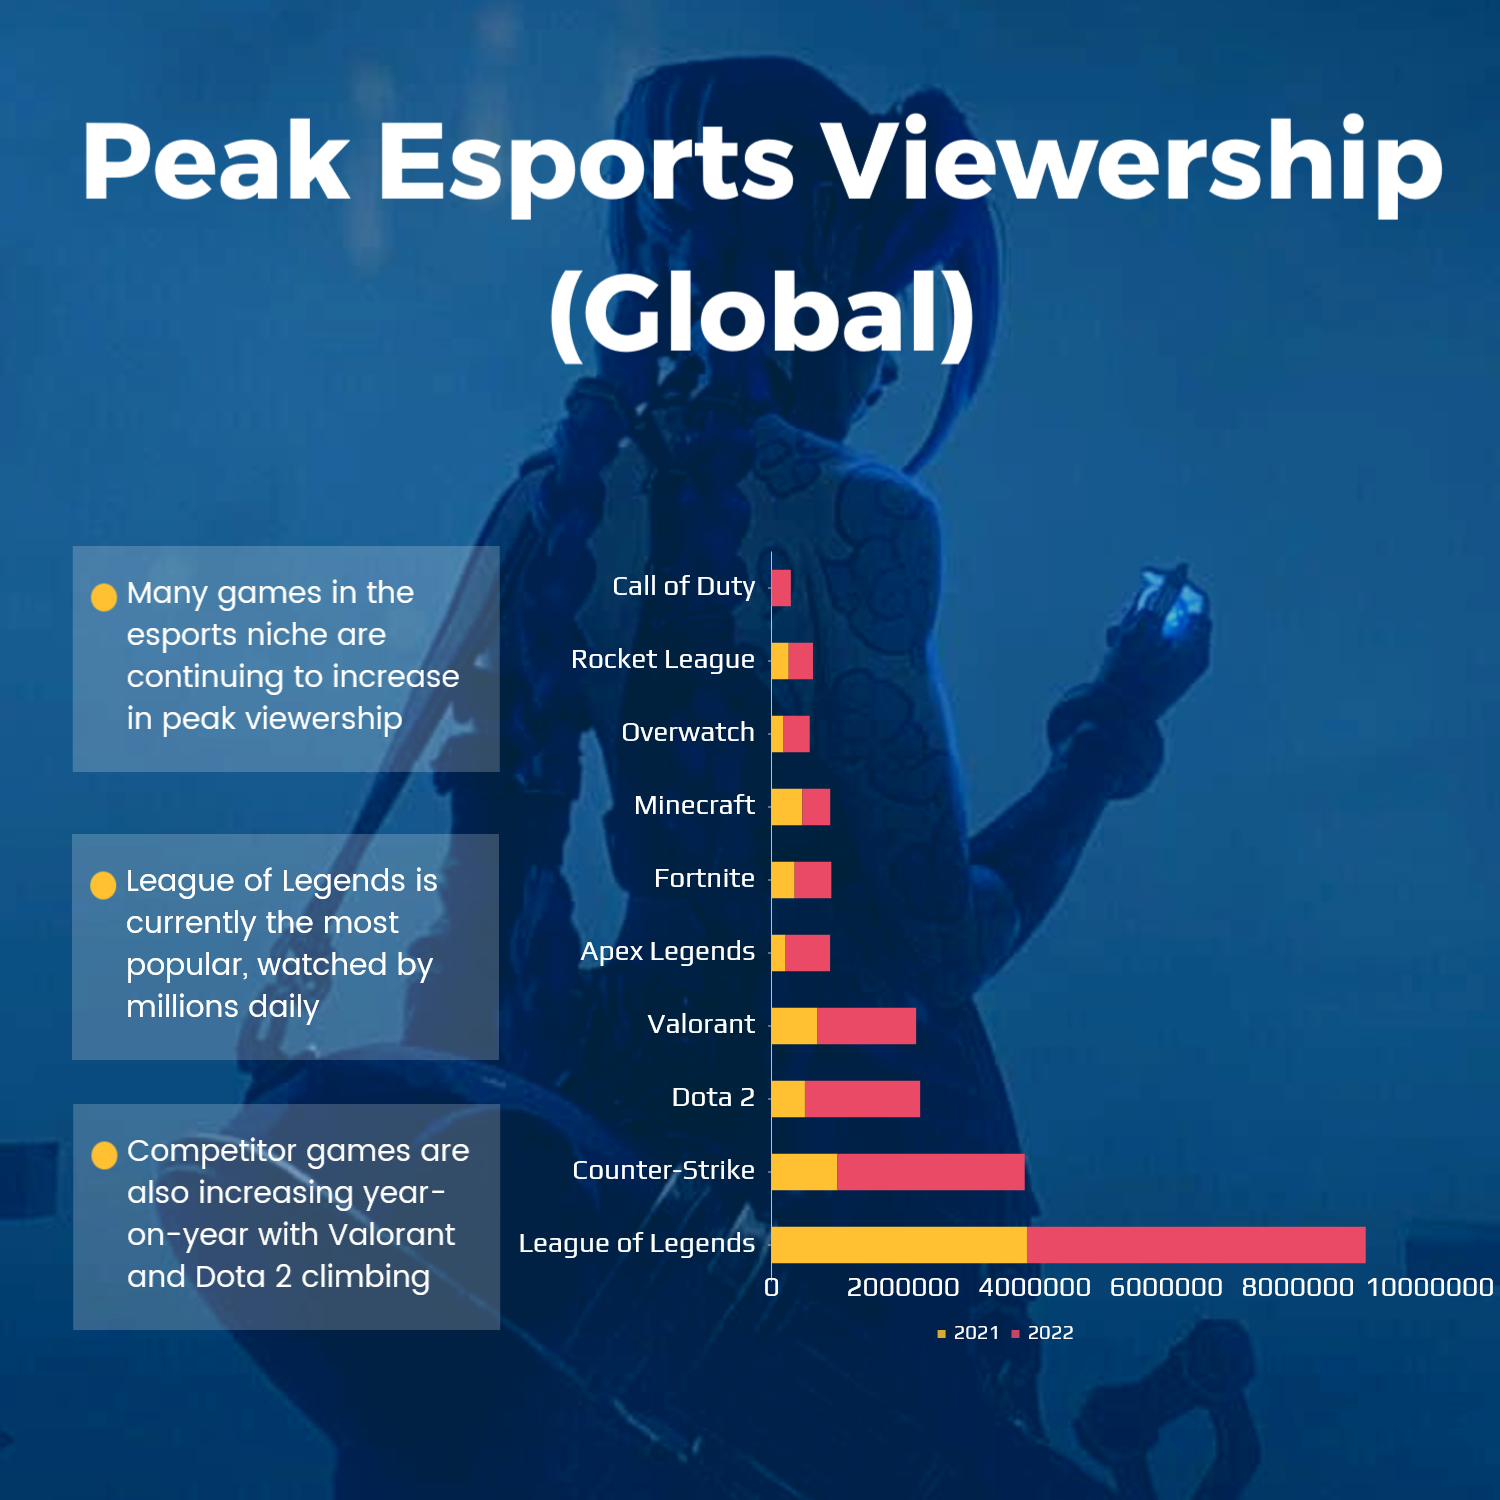 Esports viewership is increasingly exponentially year-on-year